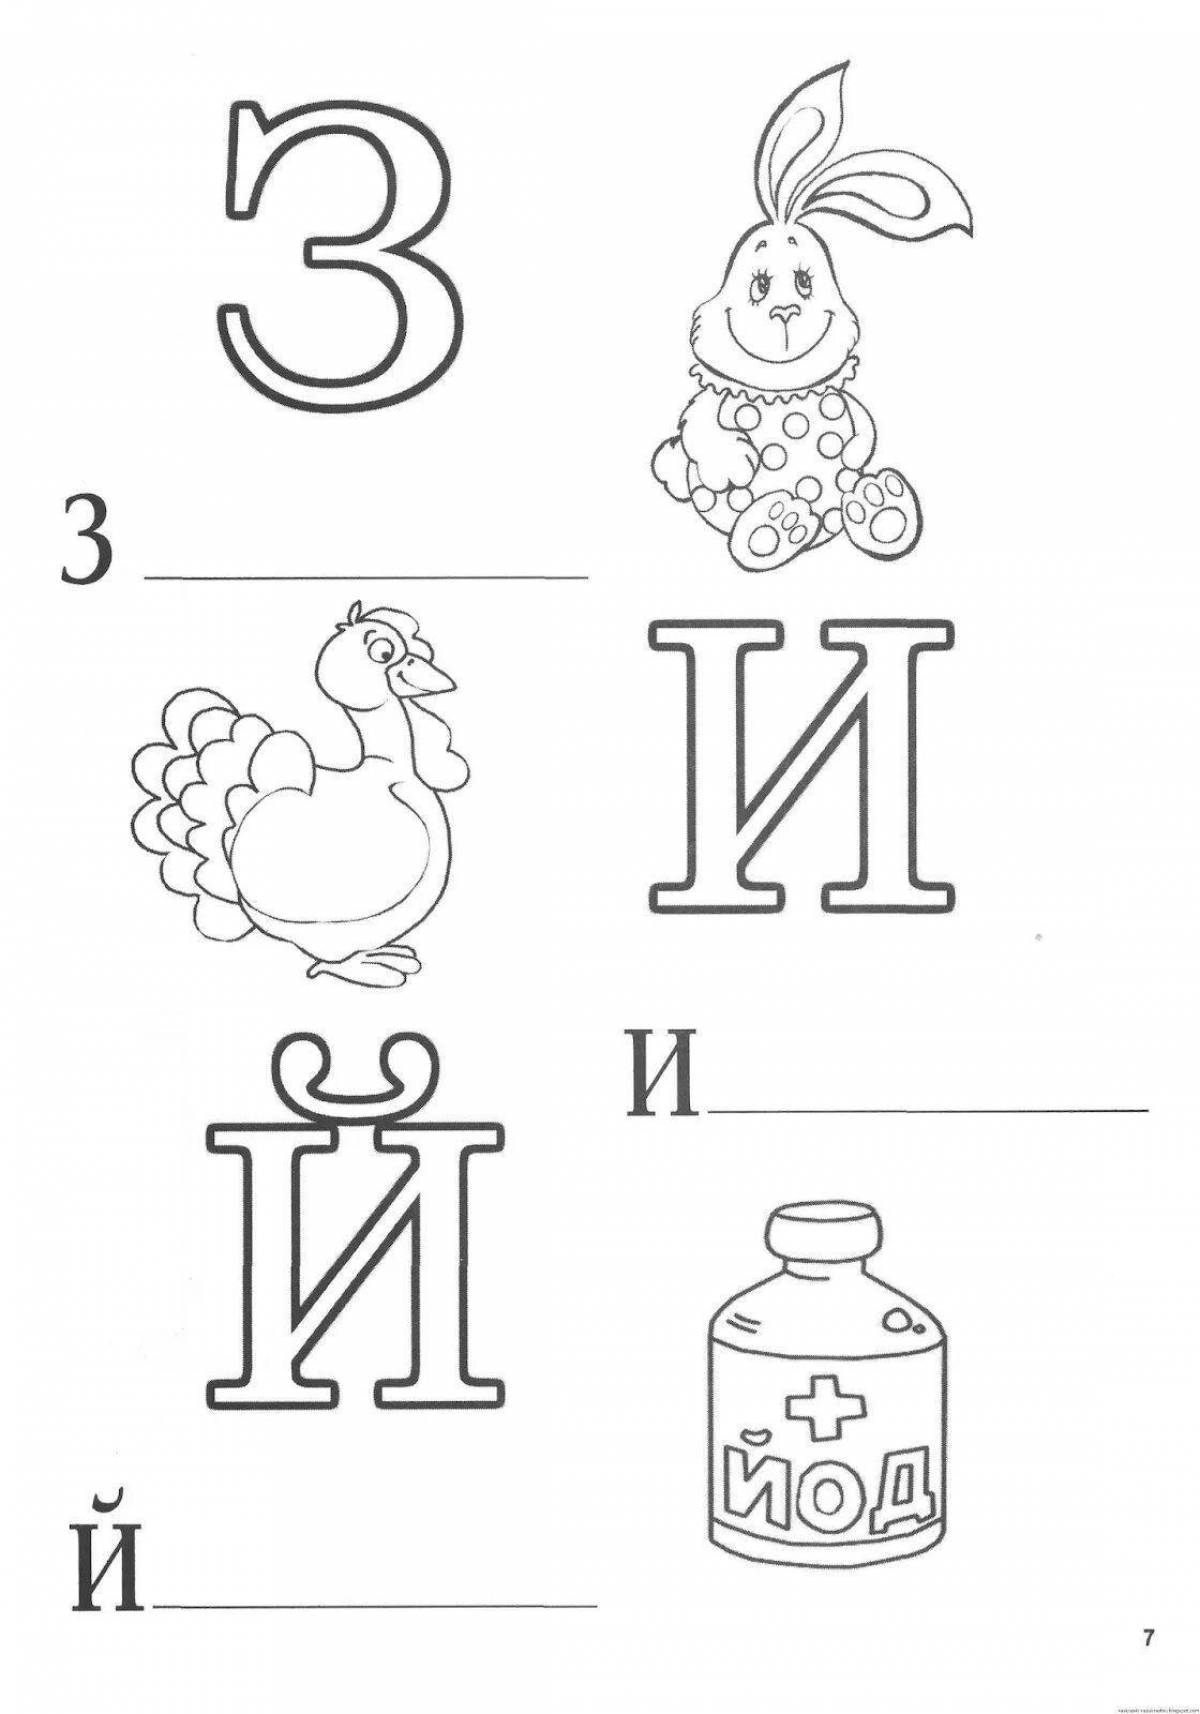 A fascinating coloring book with the alphabet for children 3-4 years old